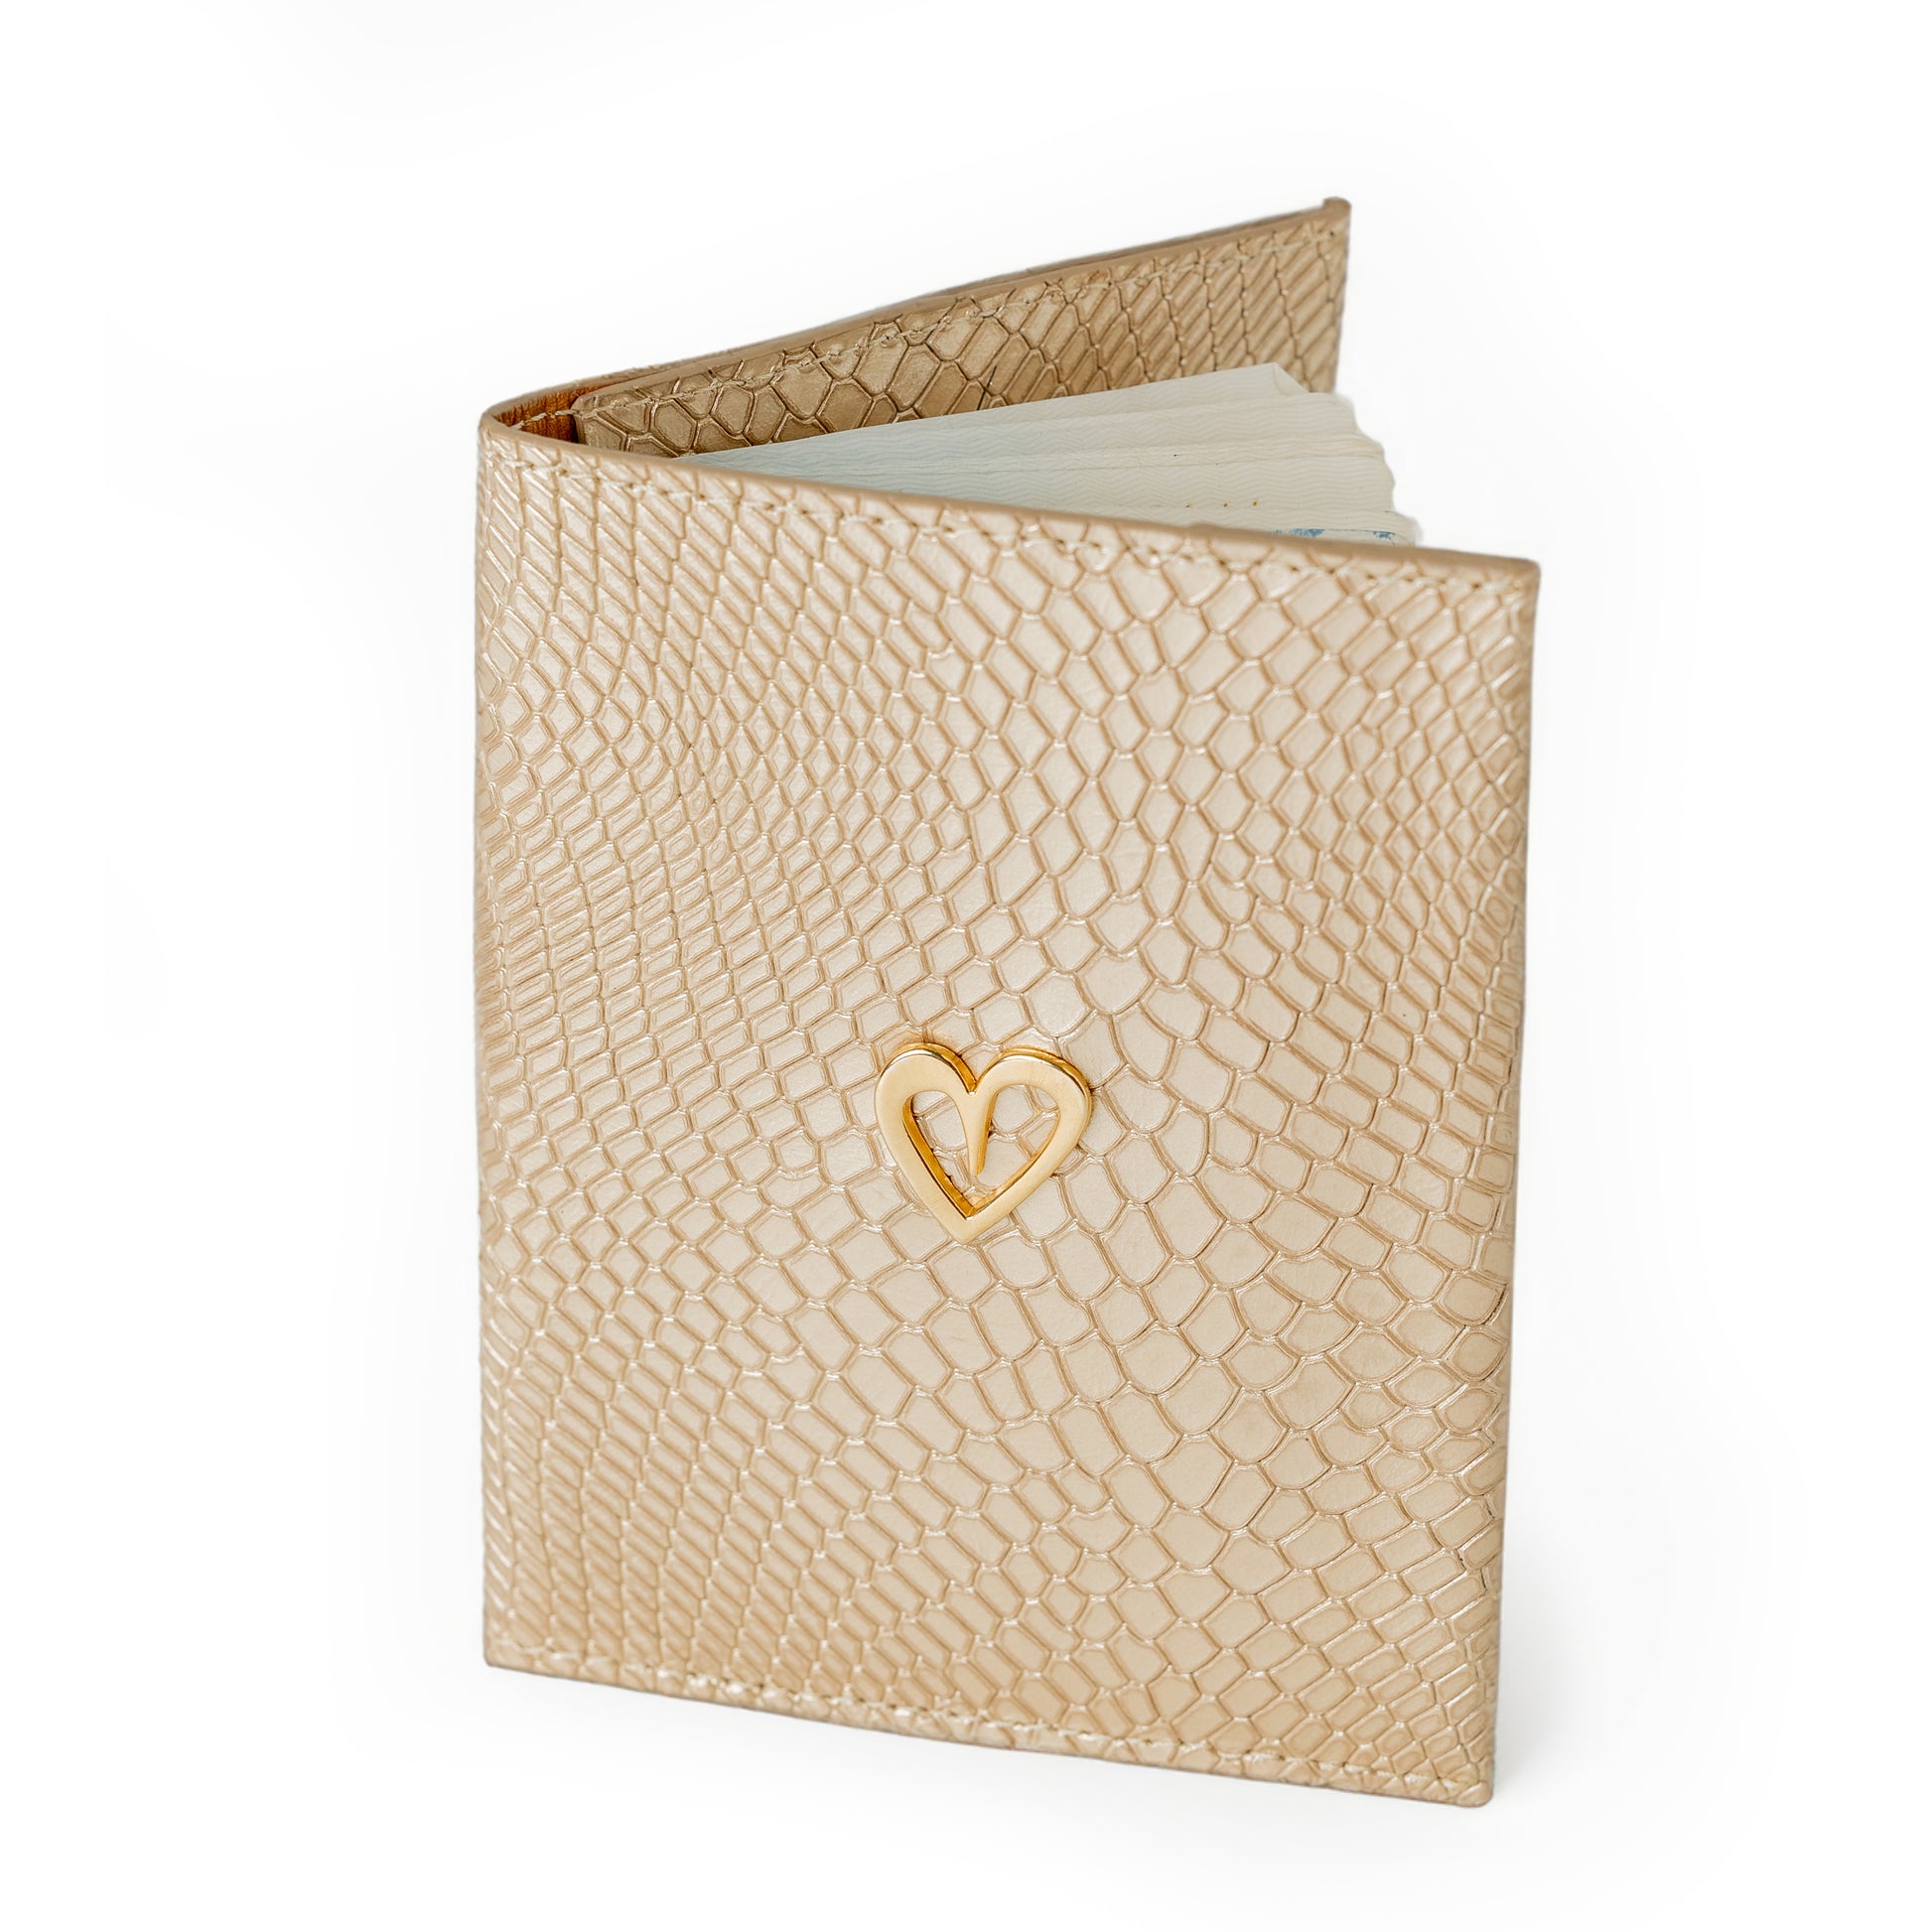 Passport Holder by Nataly Mendez Details  Genuine Leather Two cards slot Gold Heart